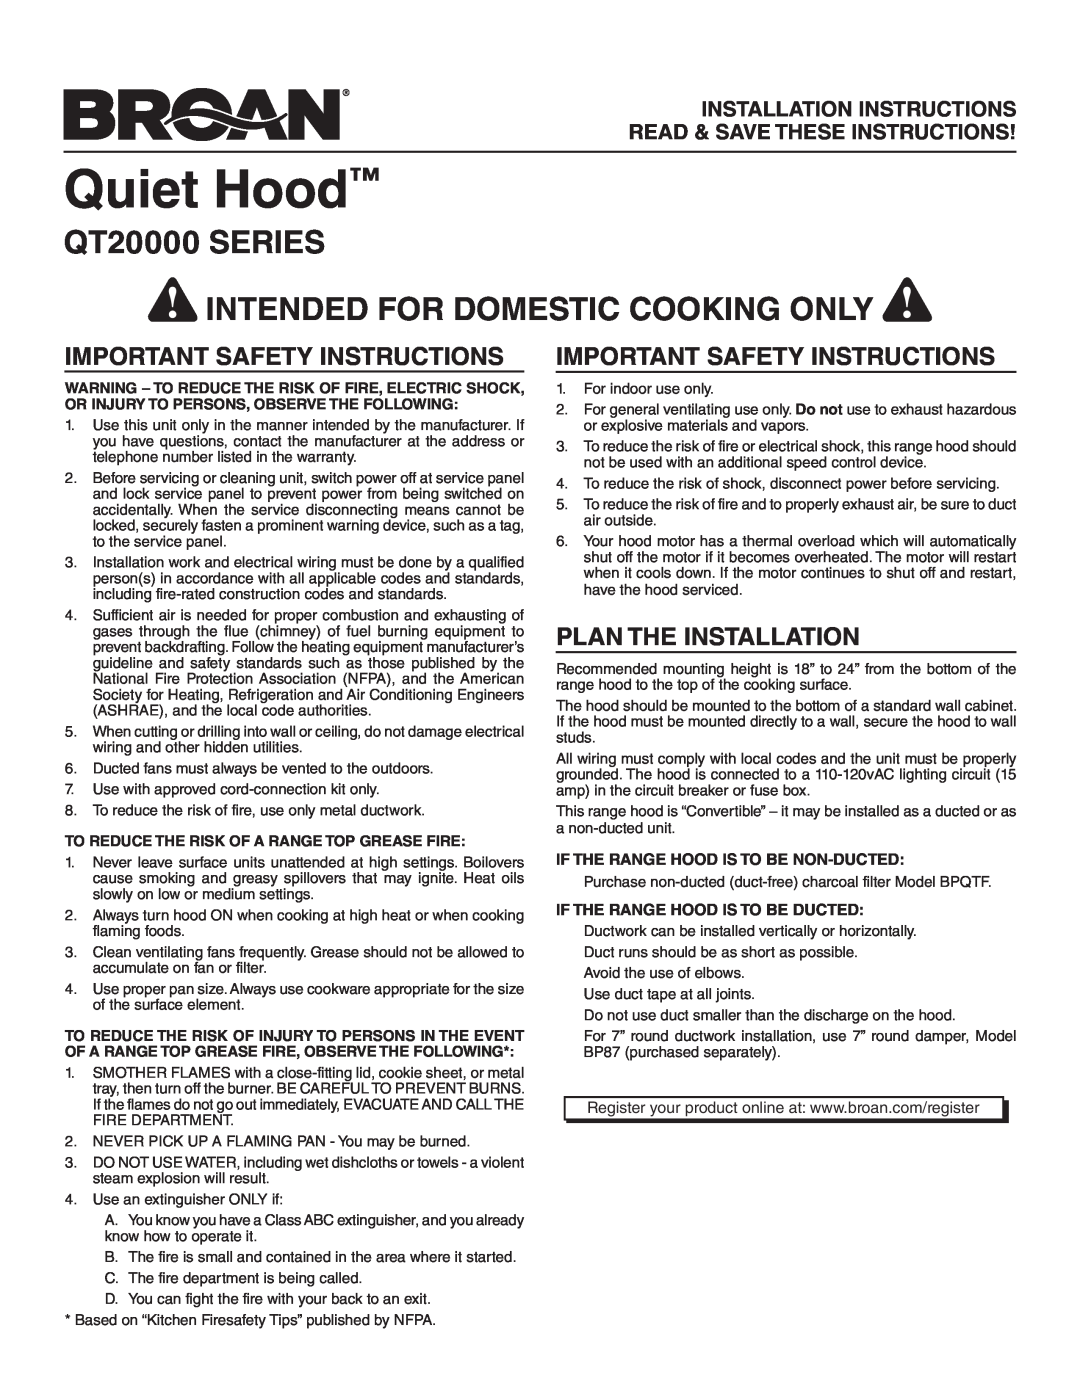 Broan QT230BL installation instructions Quiet Hood, QT20000 SERIES INTENDED FOR DOMESTIC COOKING ONLY 